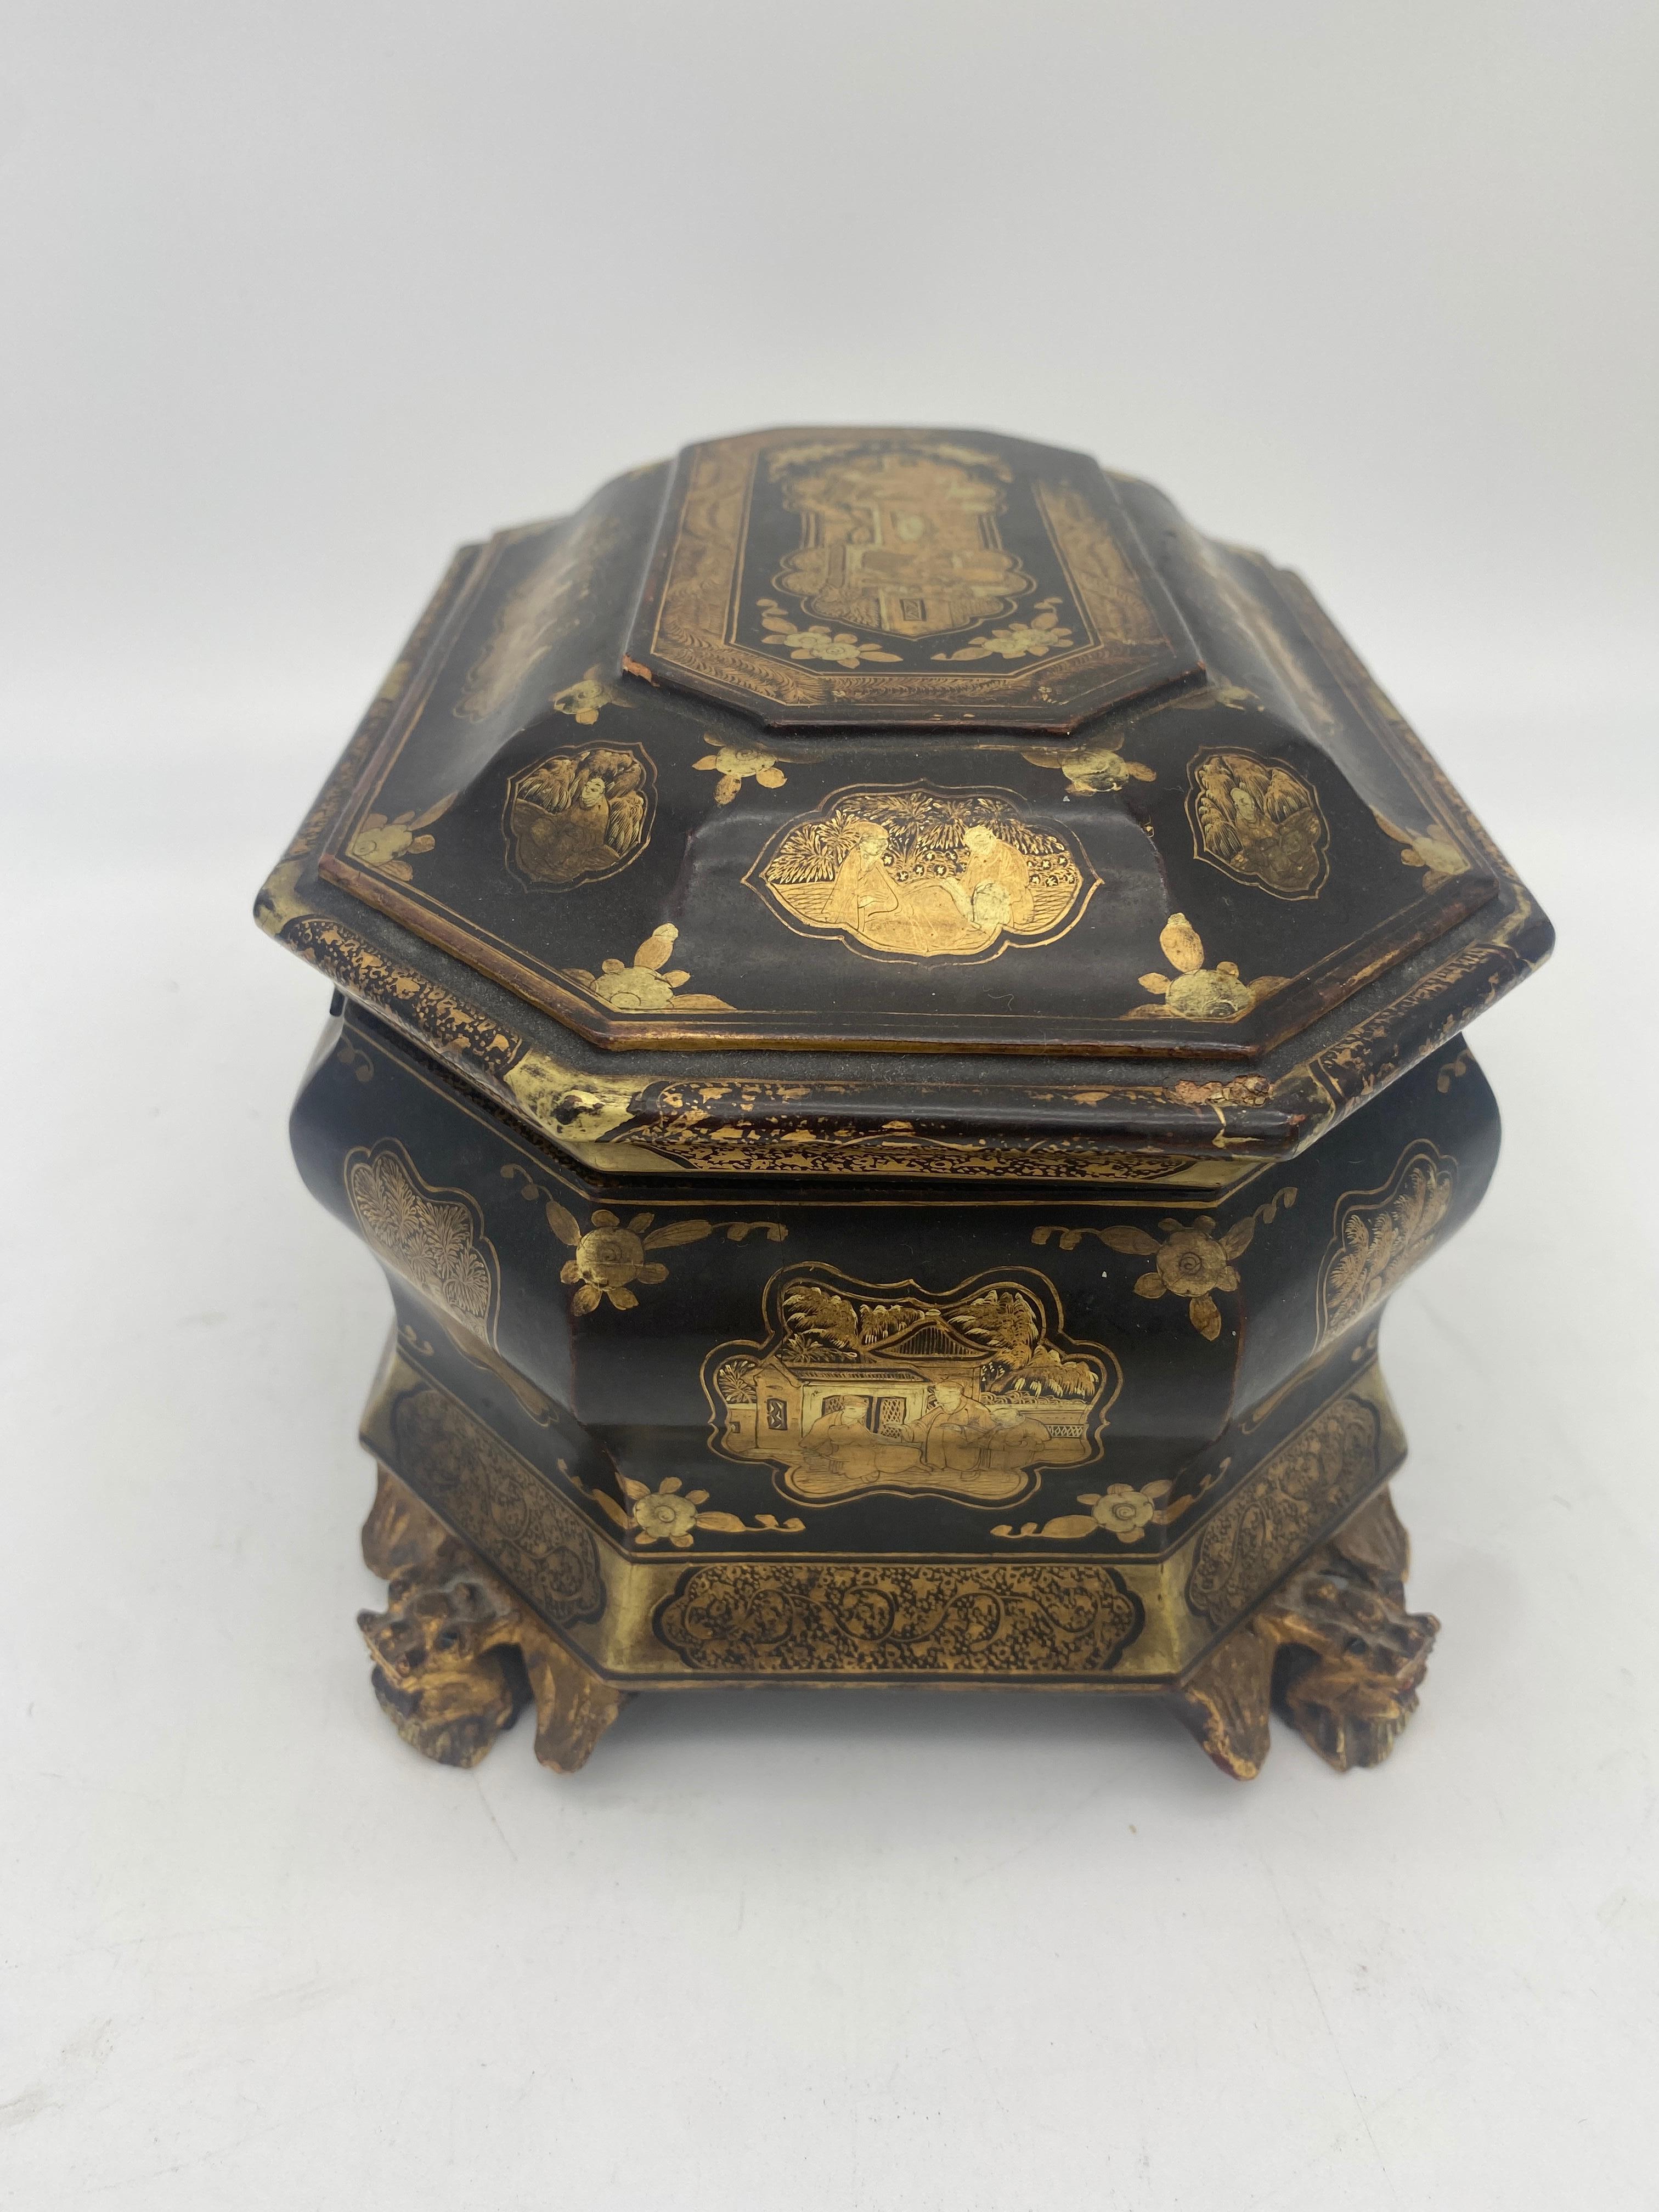 19th Century Antique Gilt Lacquer Chinese Tea Caddy For Sale 6